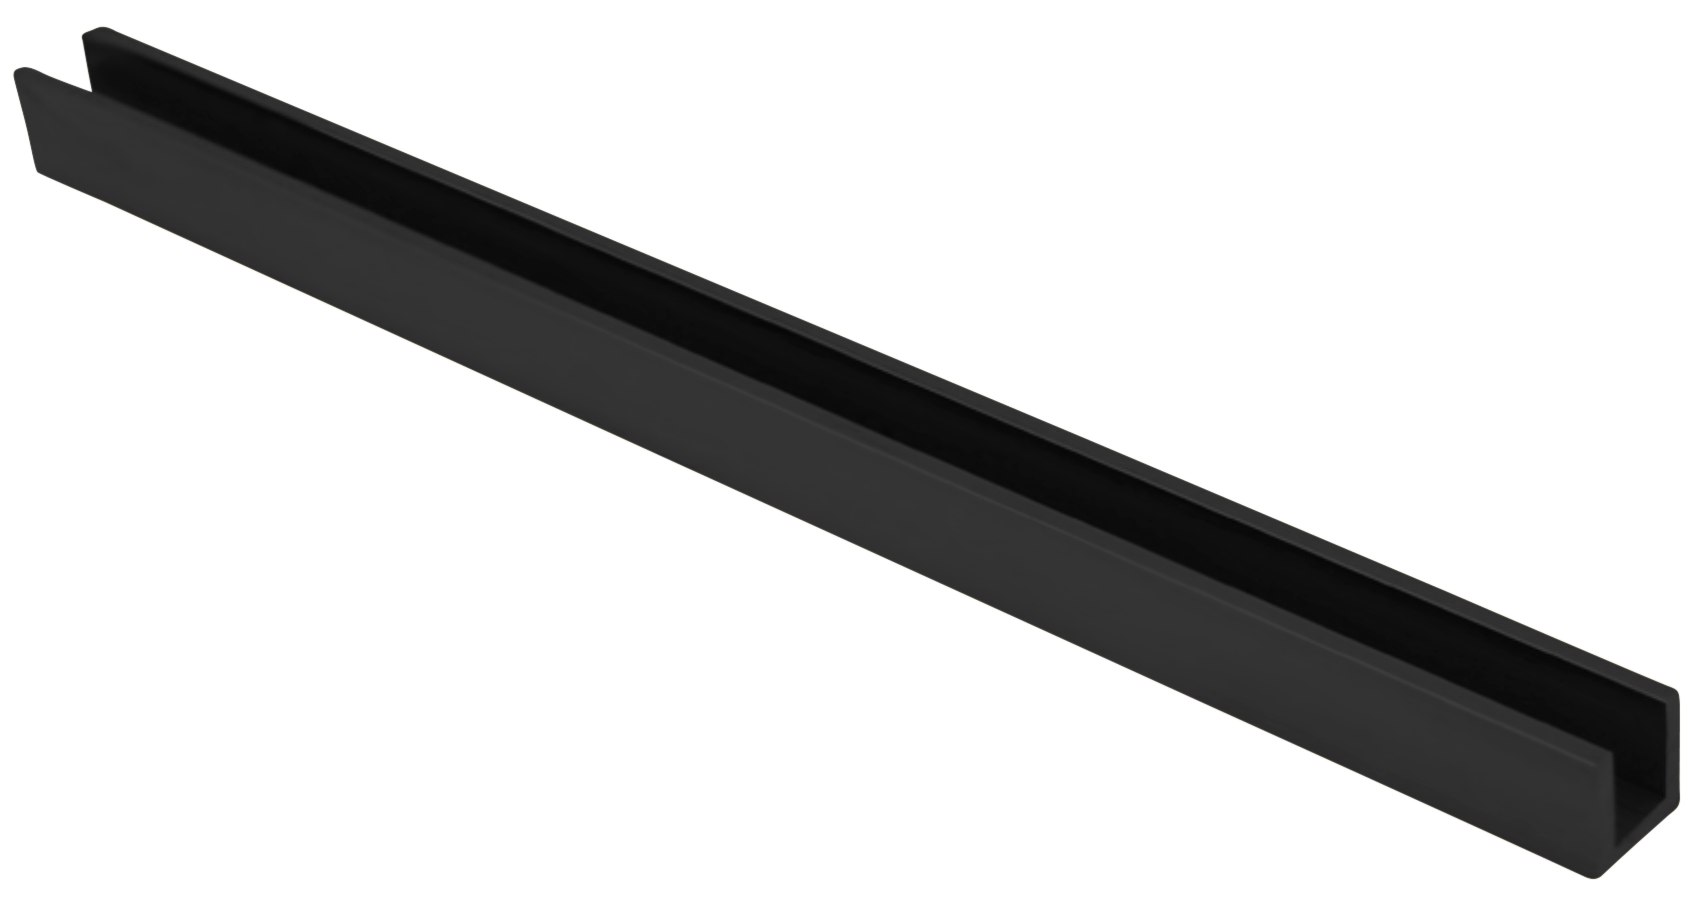 Flat and Radius Back U-Channels for 1/4" or 3/8" Glass - All finishes Matte Black